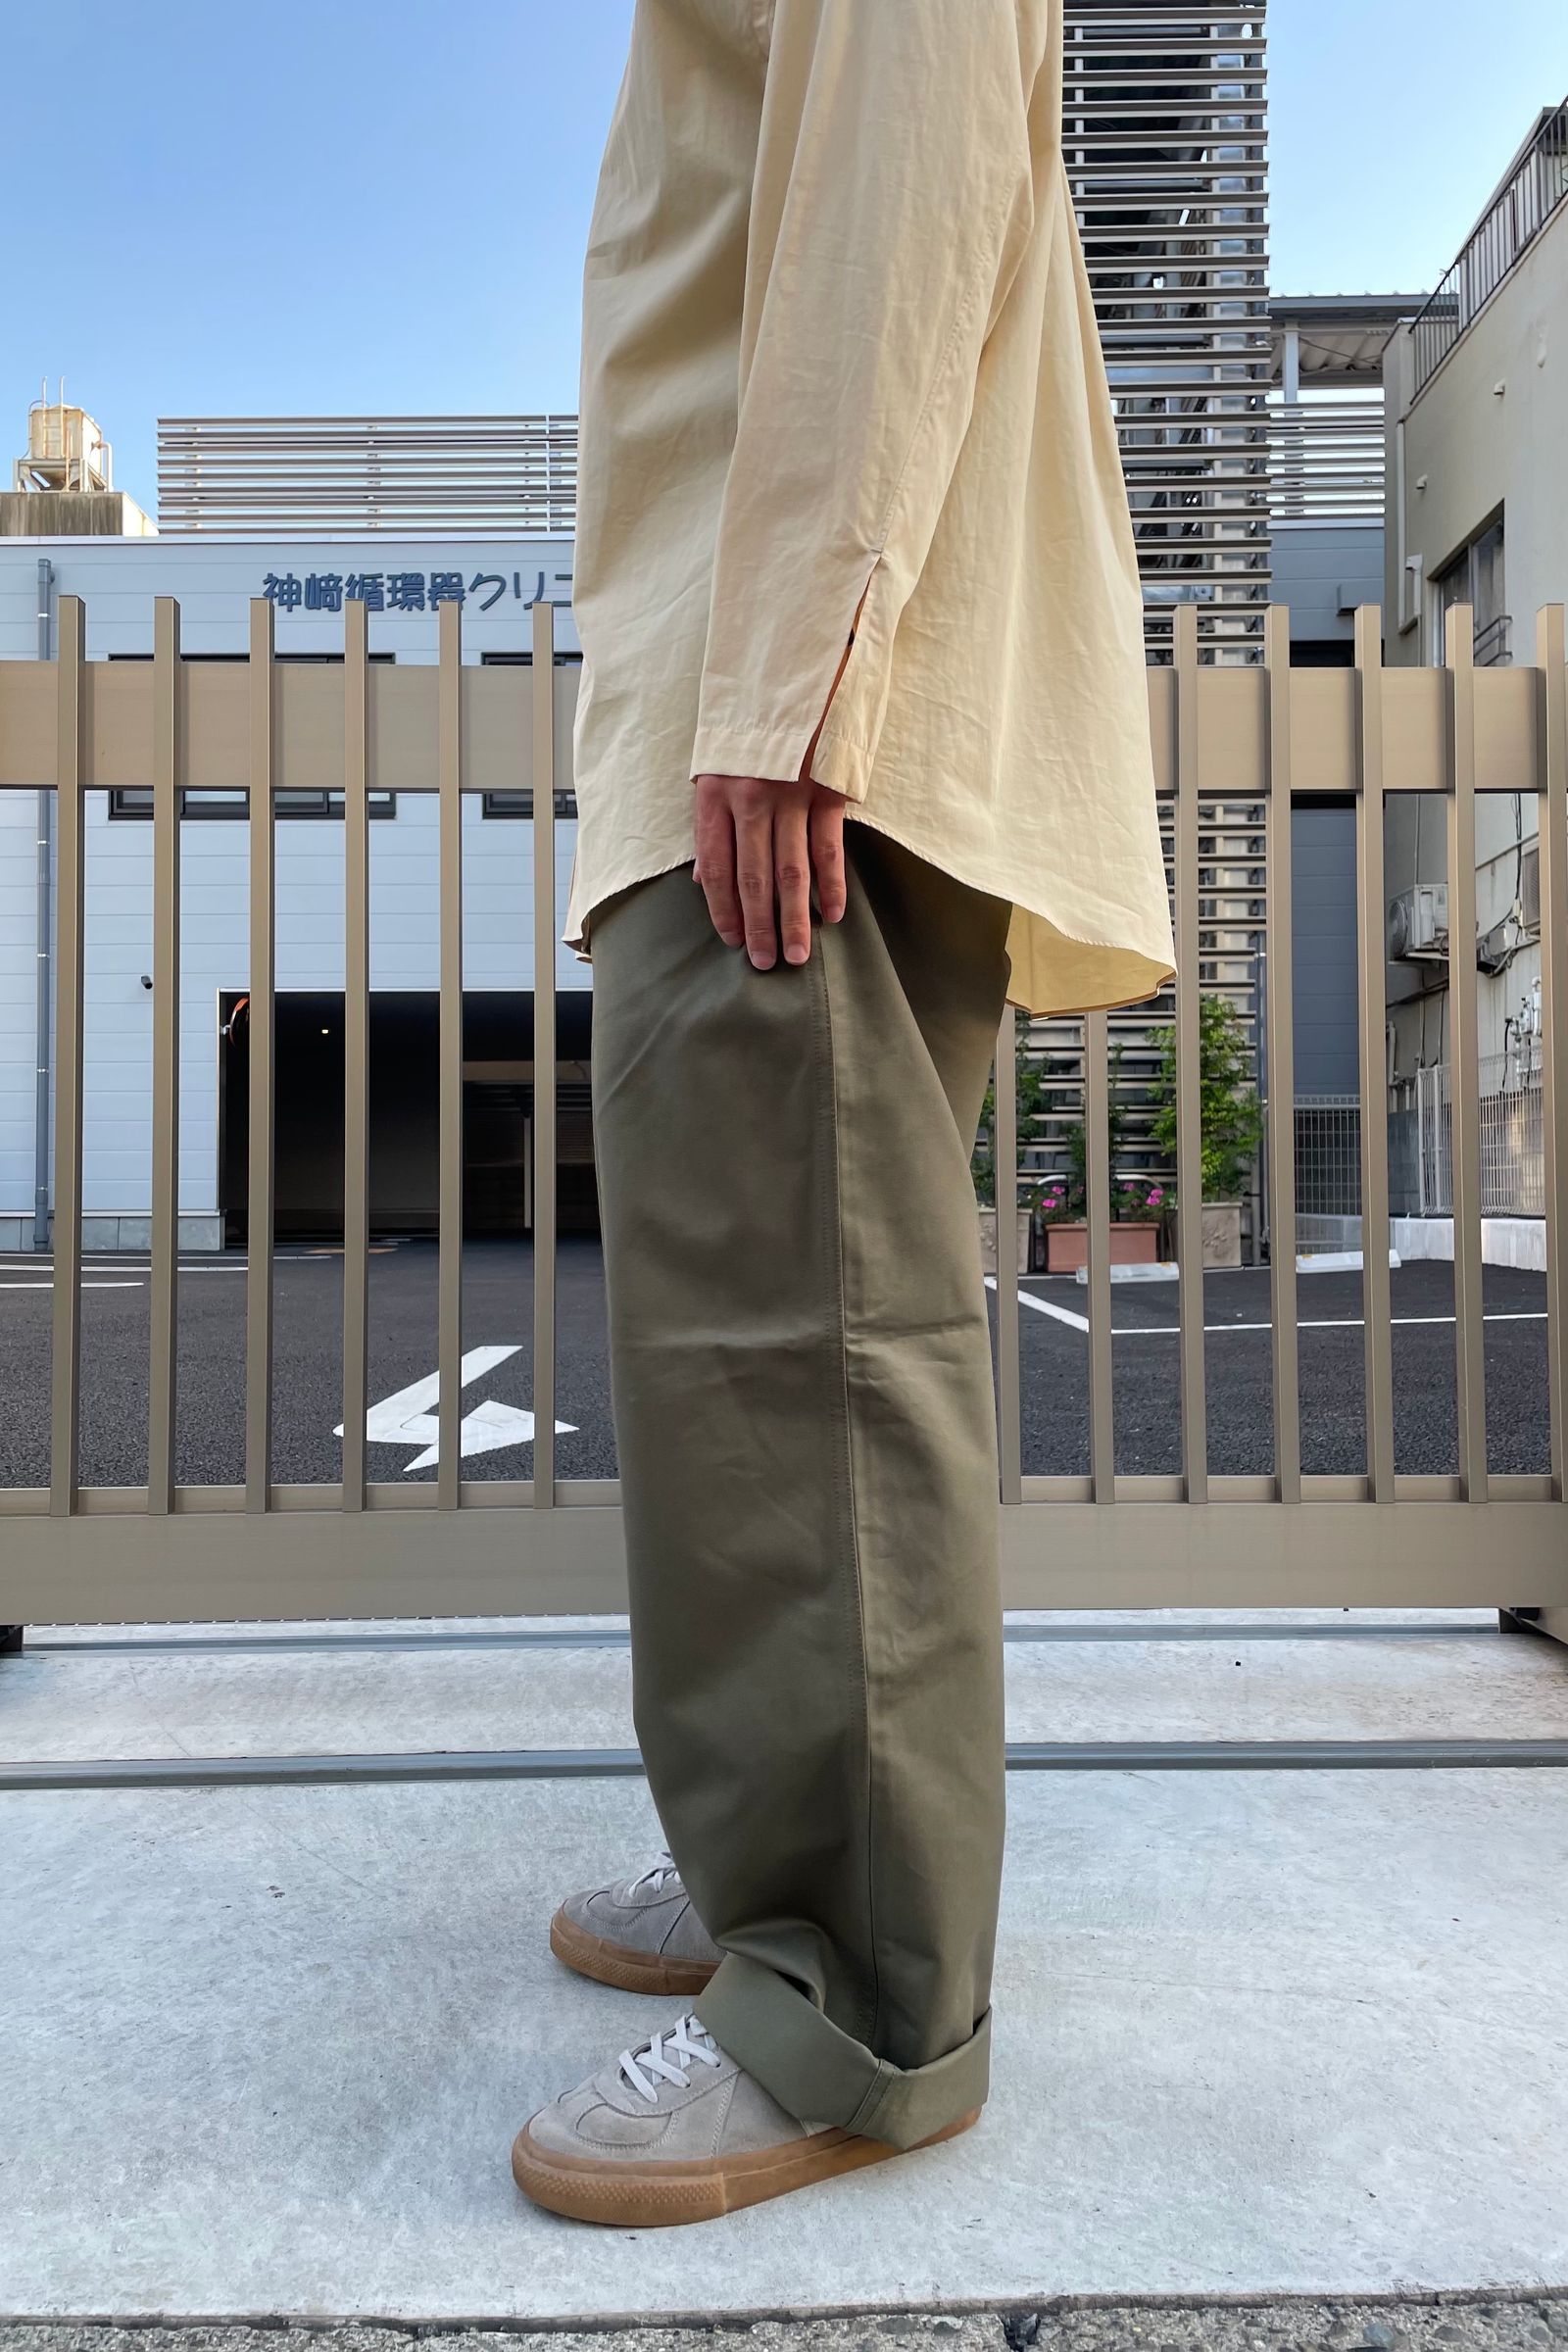 E.TAUTZ - core field trousers/chino army green 21aw | asterisk